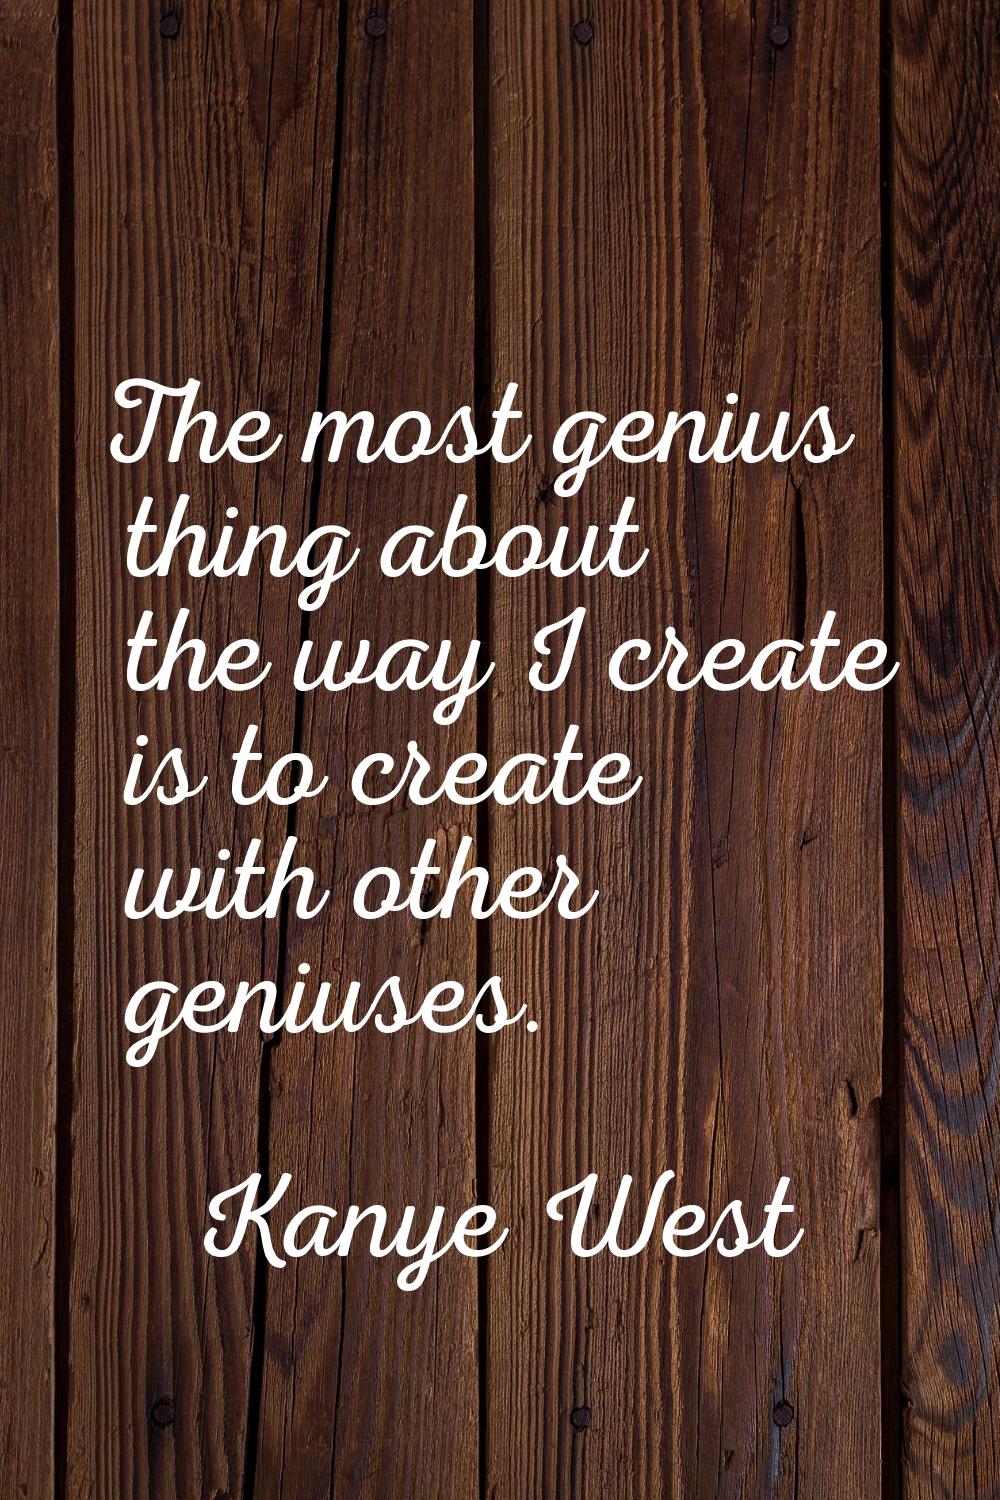 The most genius thing about the way I create is to create with other geniuses.